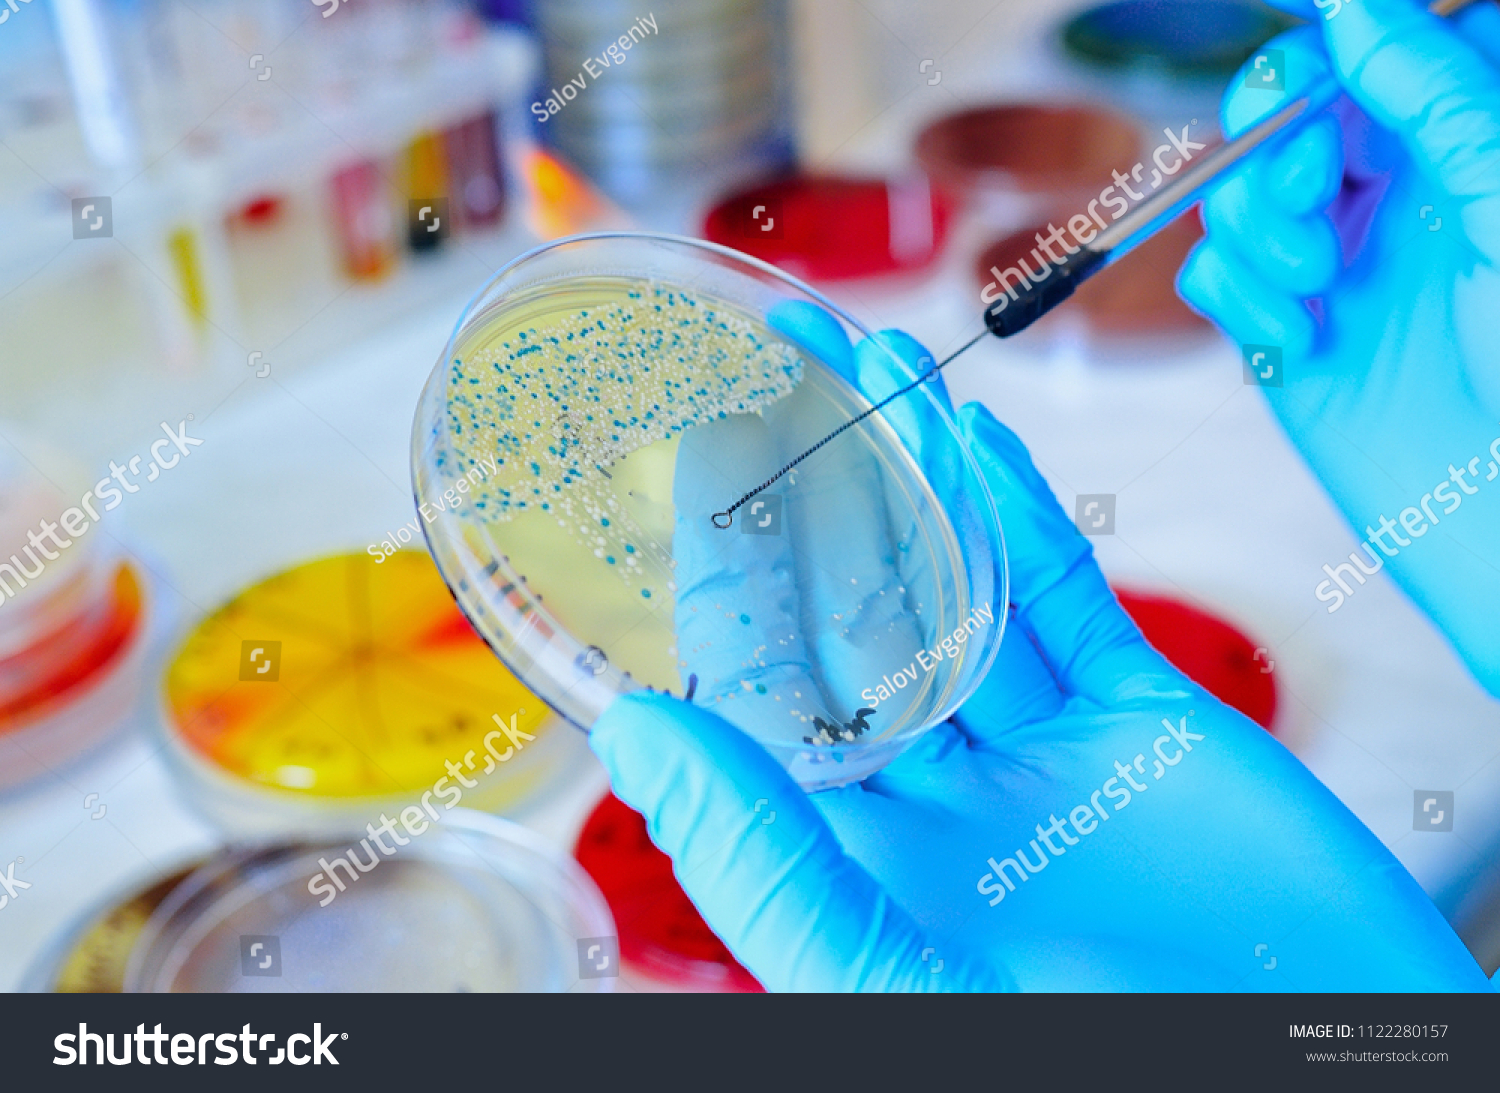 Petri dish. Microbiological laboratory. Mold and fungal cultures. Bacterial research #1122280157